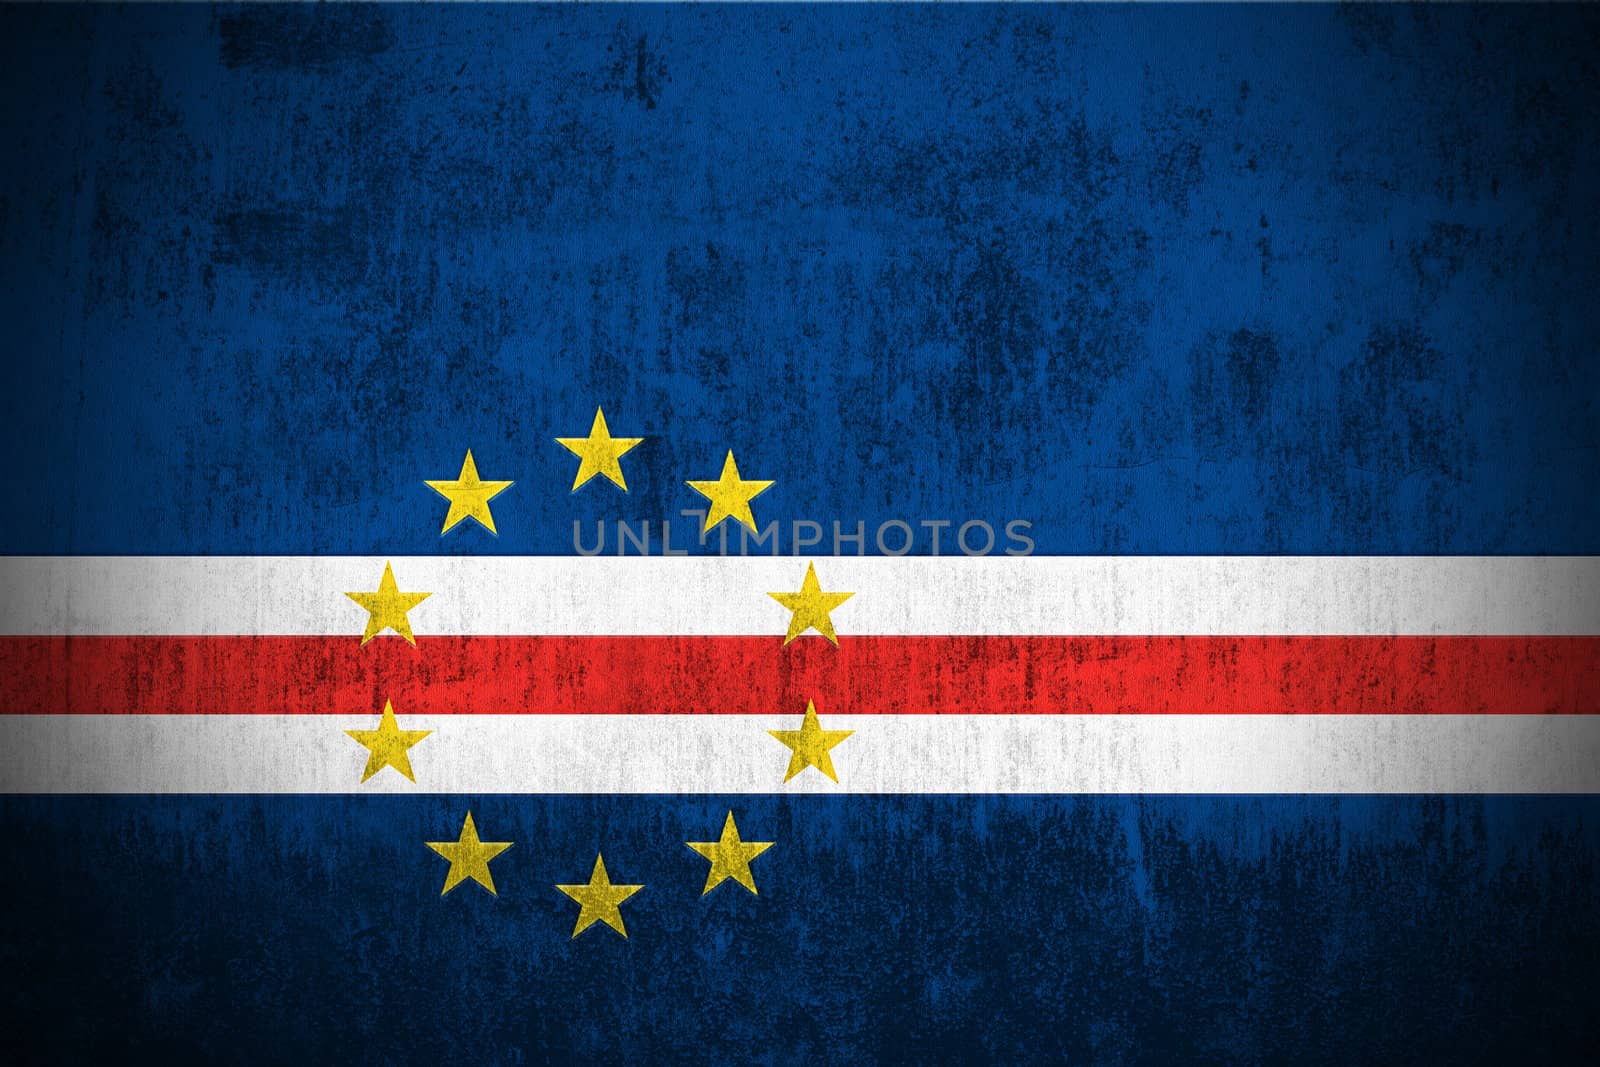 Weathered Flag Of Cape-verde, fabric textured
